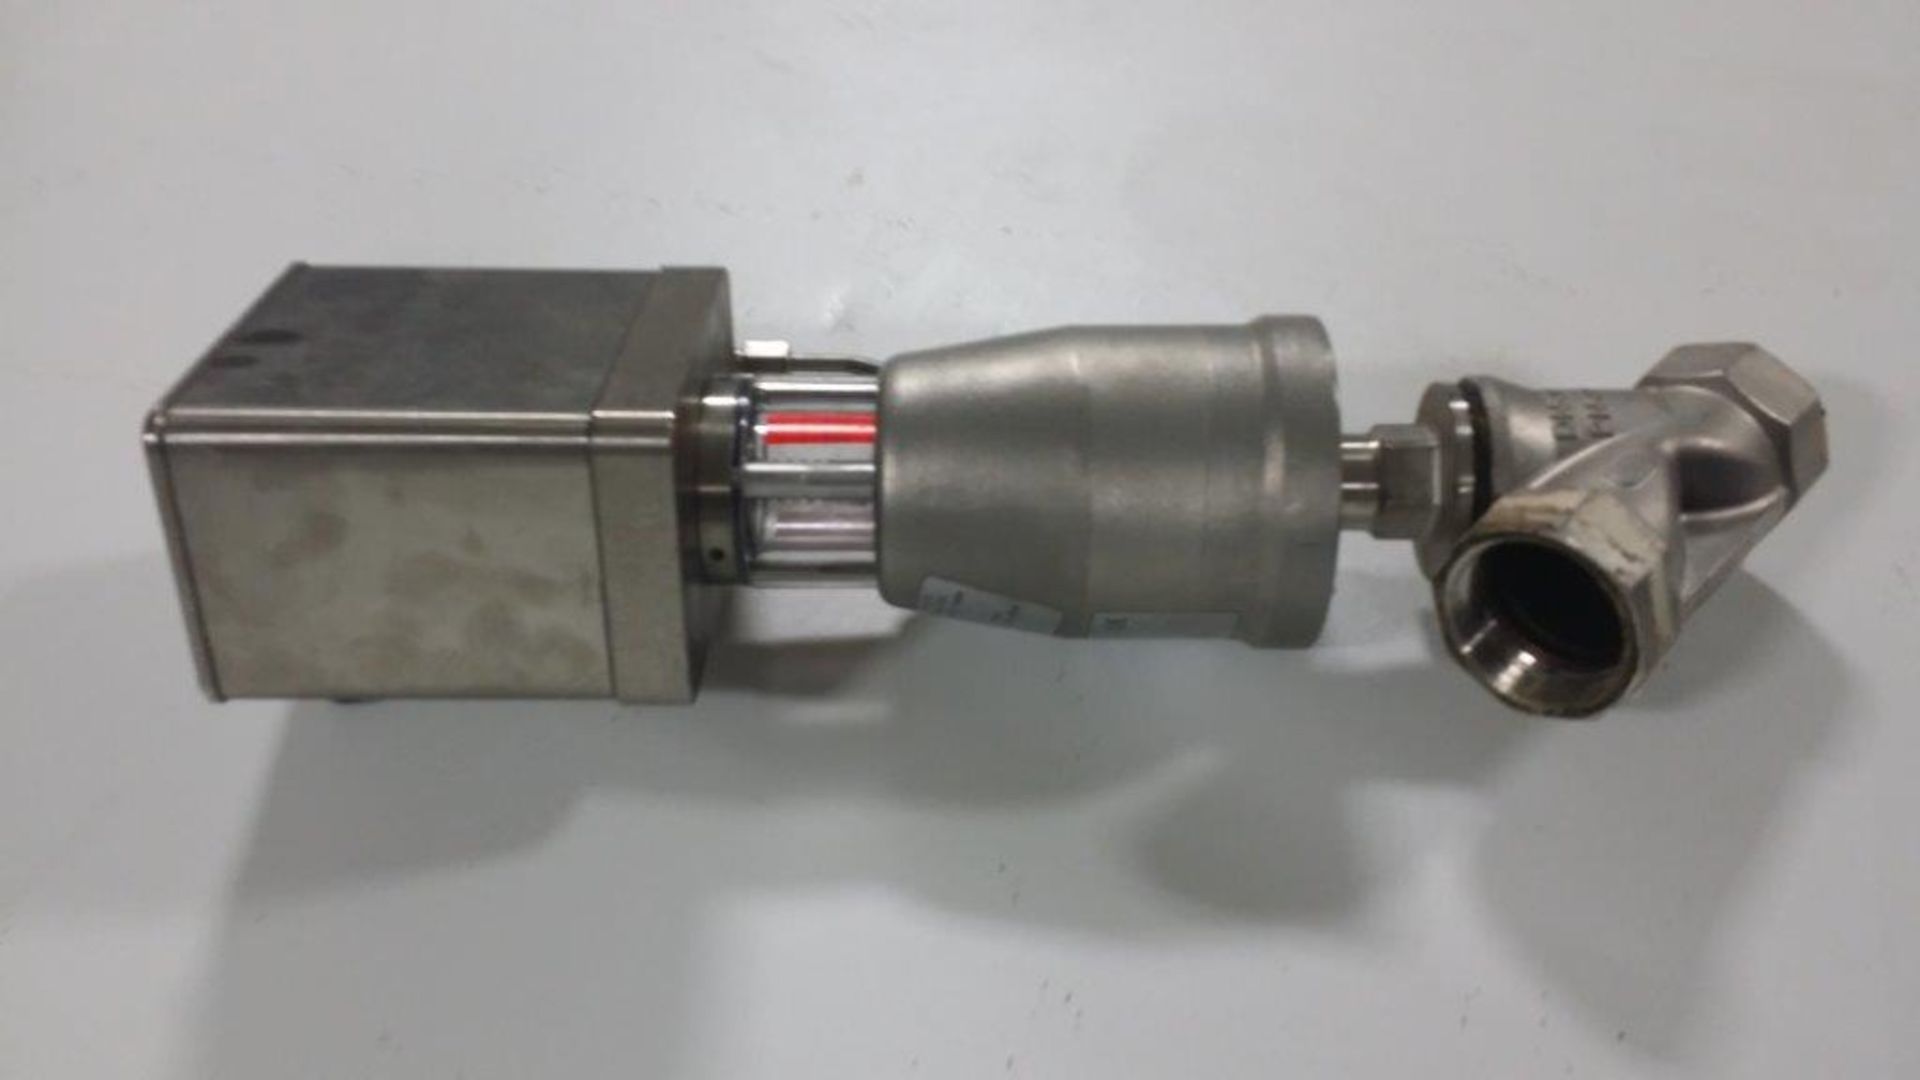 Schubert & Salzer Type 7020 Angle Seat Control Valve Size 1/4" to 3" Pressures up to 580 PSI, - Image 2 of 5